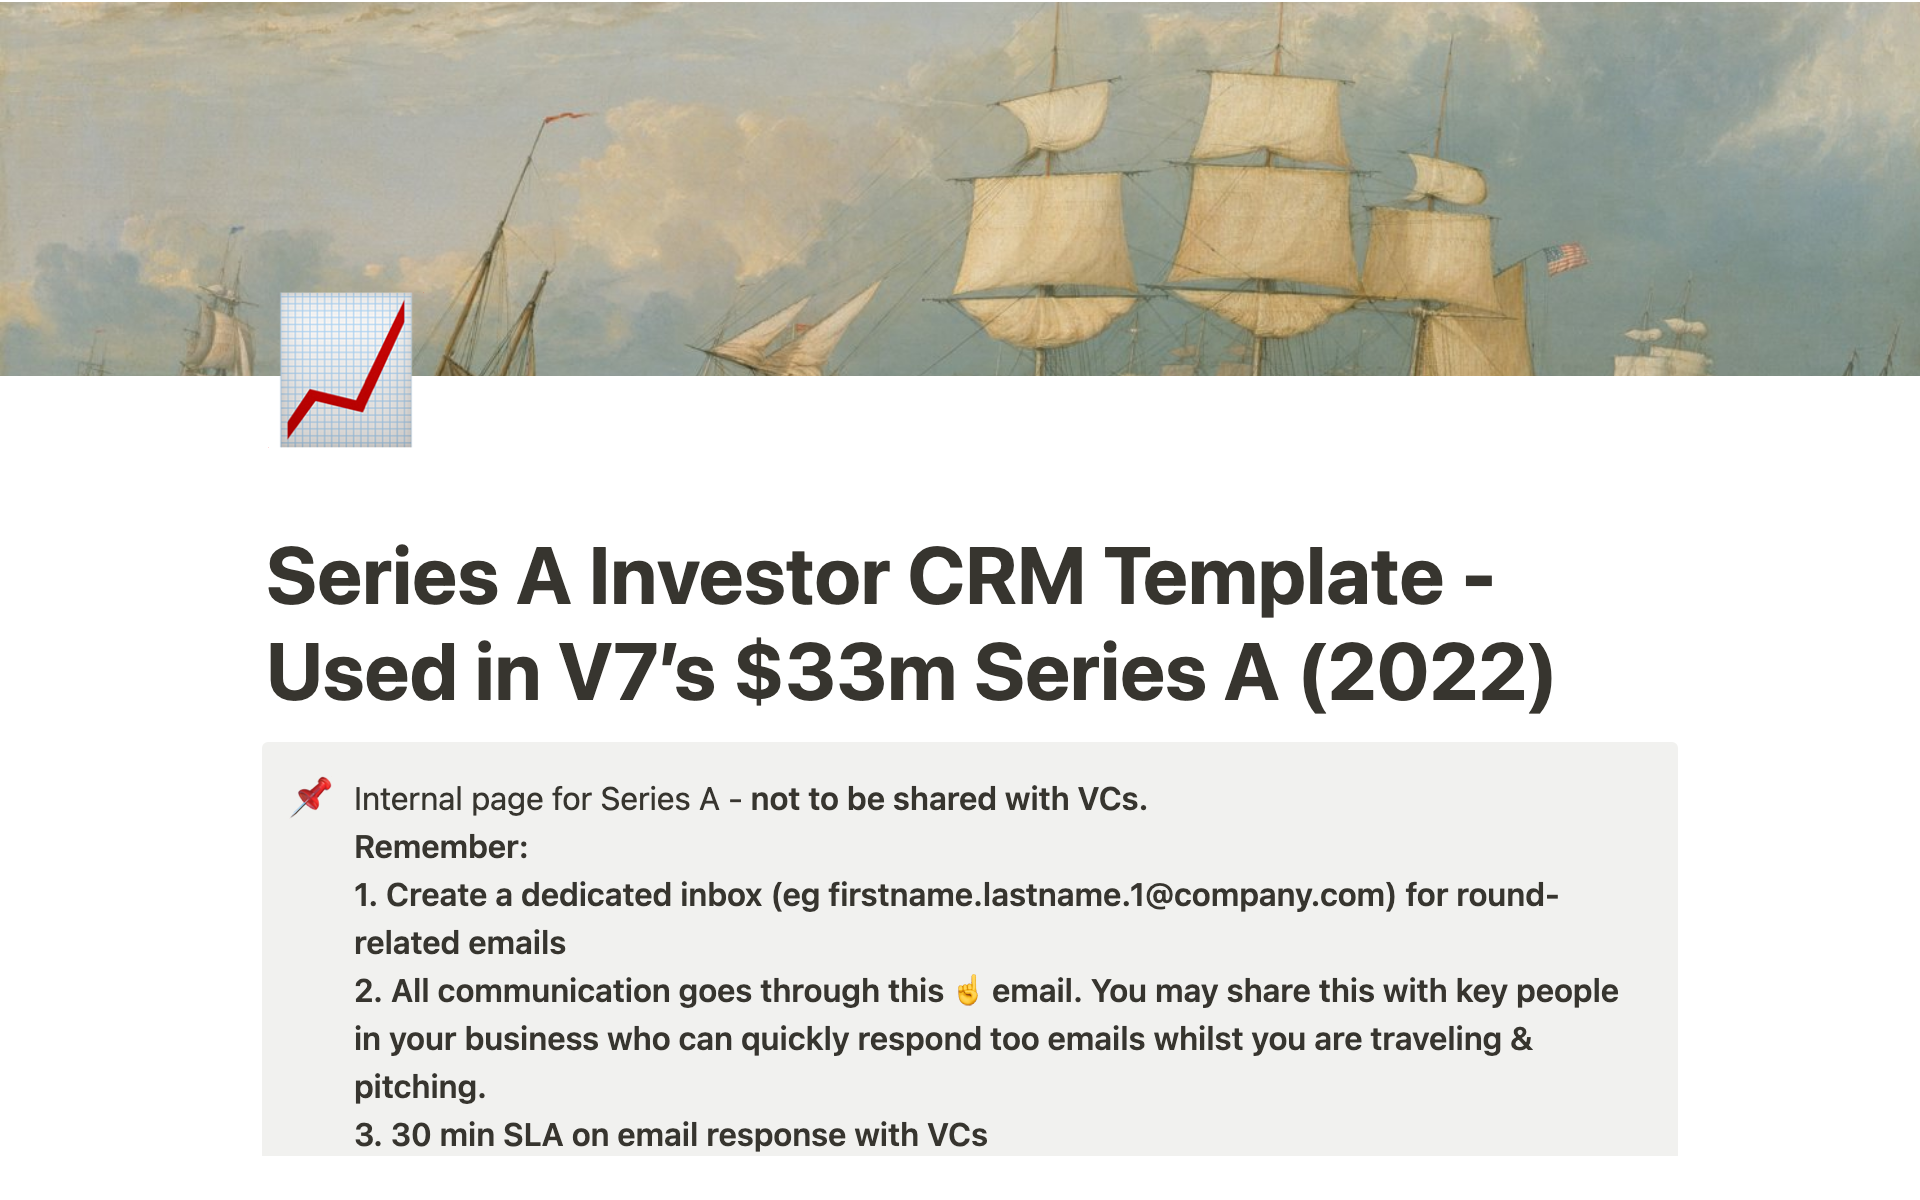 V7 used this to raise a $33m series A, it was featured in Business insider and we were asked to share it :) It will also be featured in an Op-ed for Sifted.eu